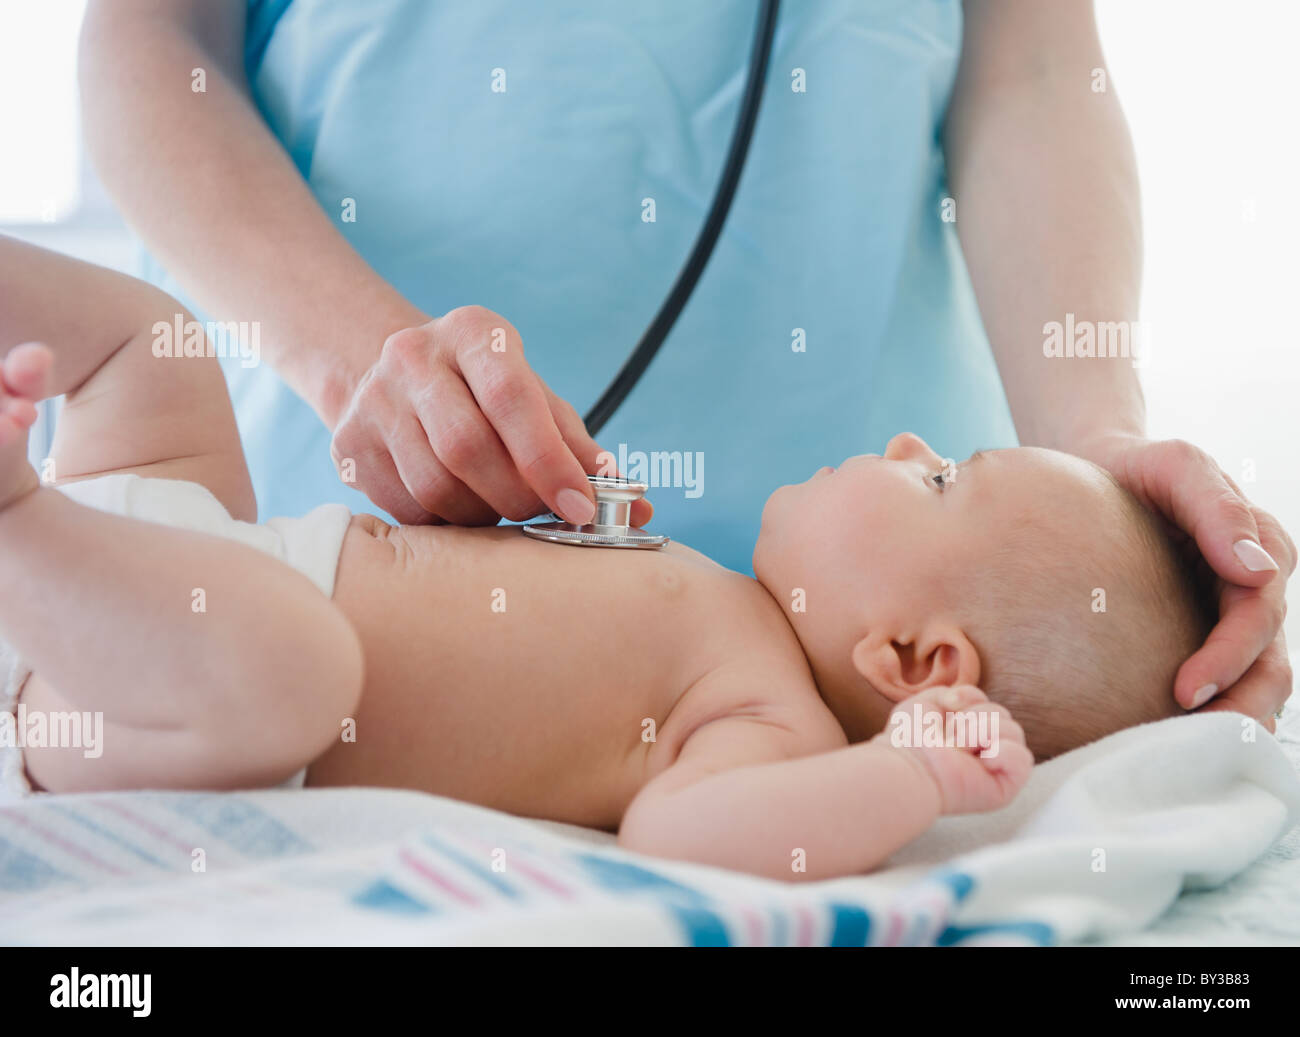 USA, New Jersey, Jersey City, Female doctor examining baby girl (2-5 mois) Banque D'Images